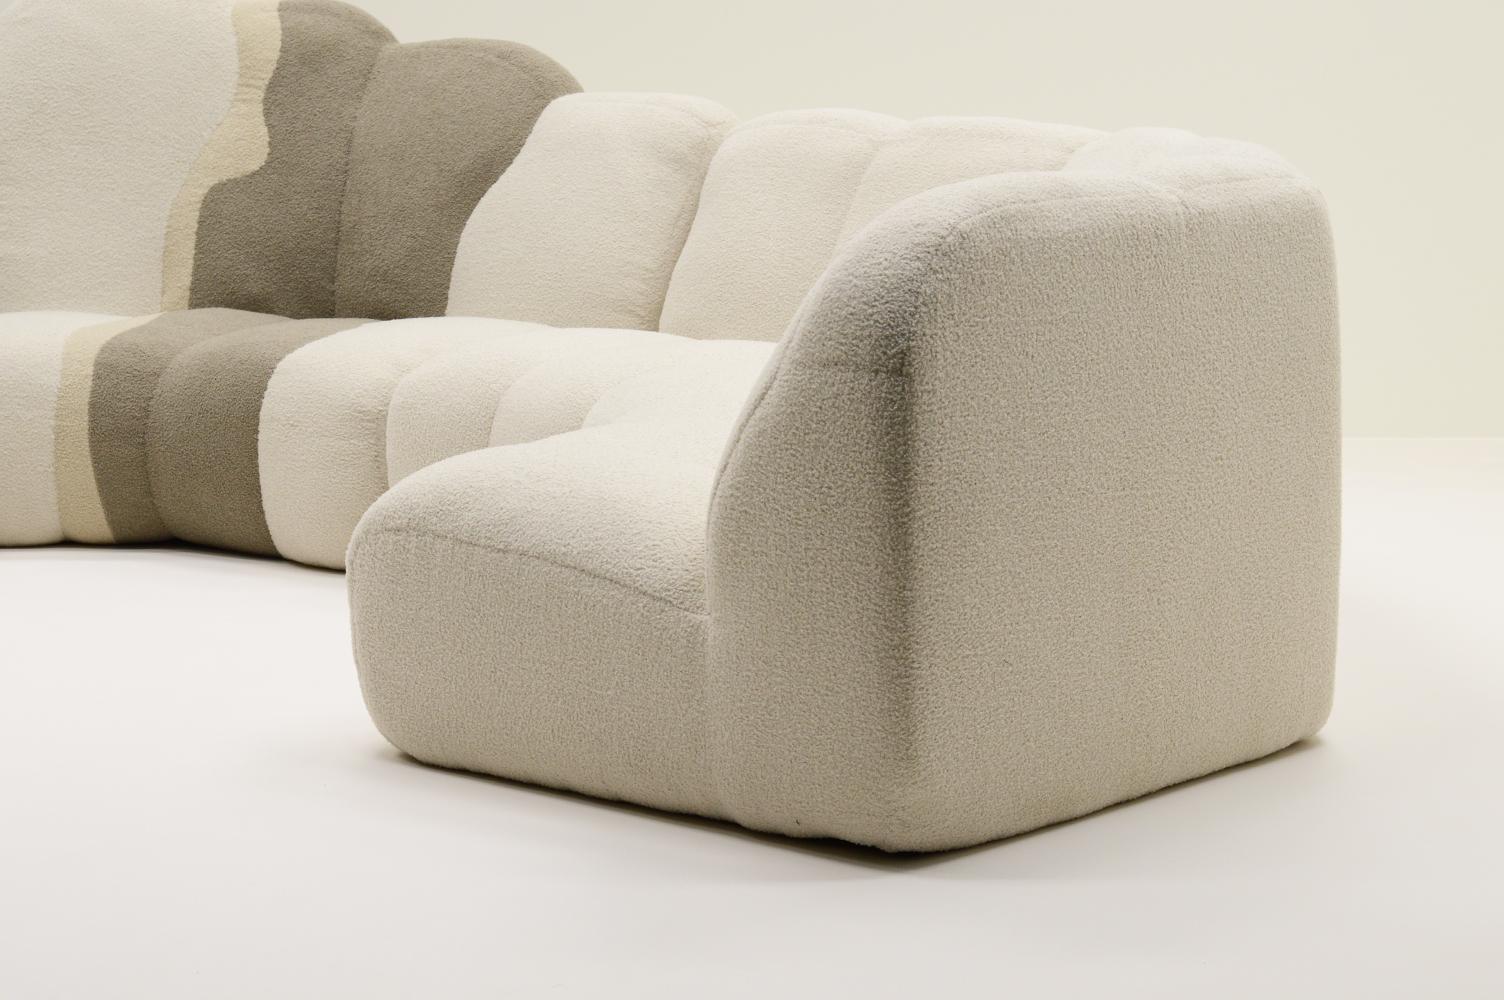 Fabric Playful Teddy Sofa by Design Studio Polster Mit Pep, Germany 80s